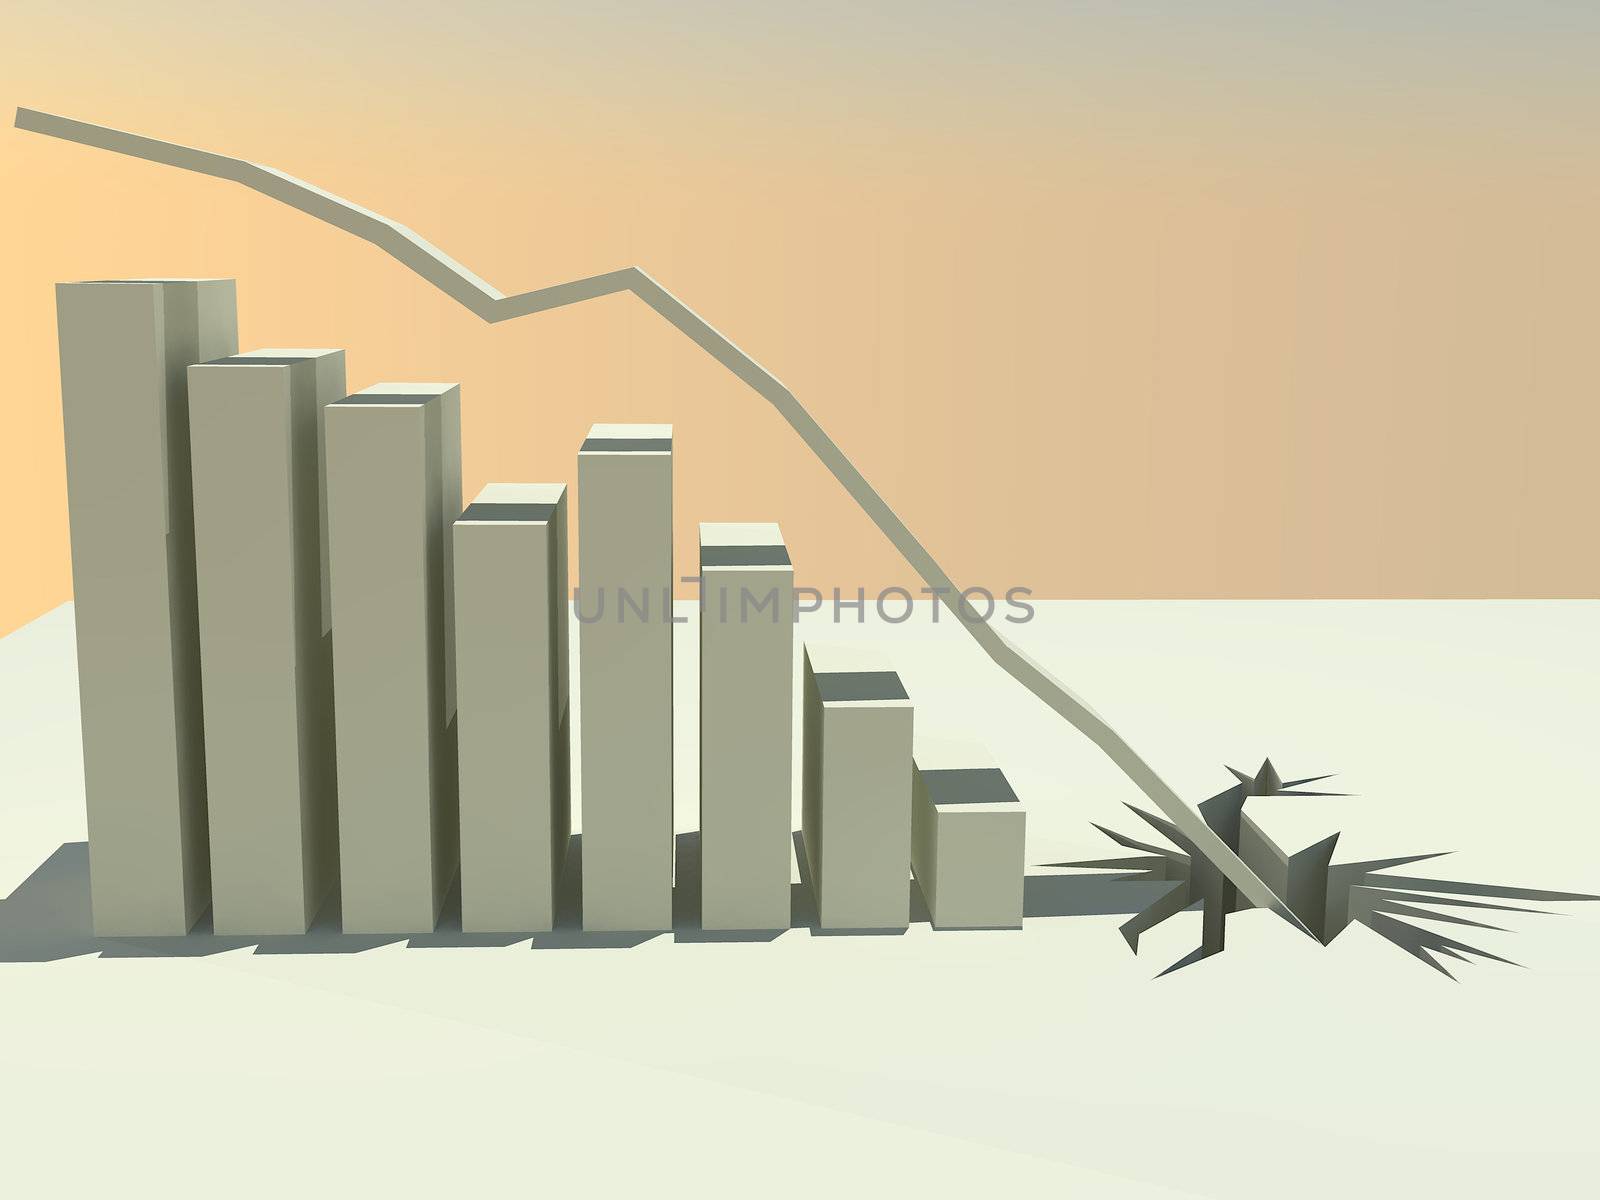 A 3d rendered bar graph showing continual decline until the line crashes through the floor.